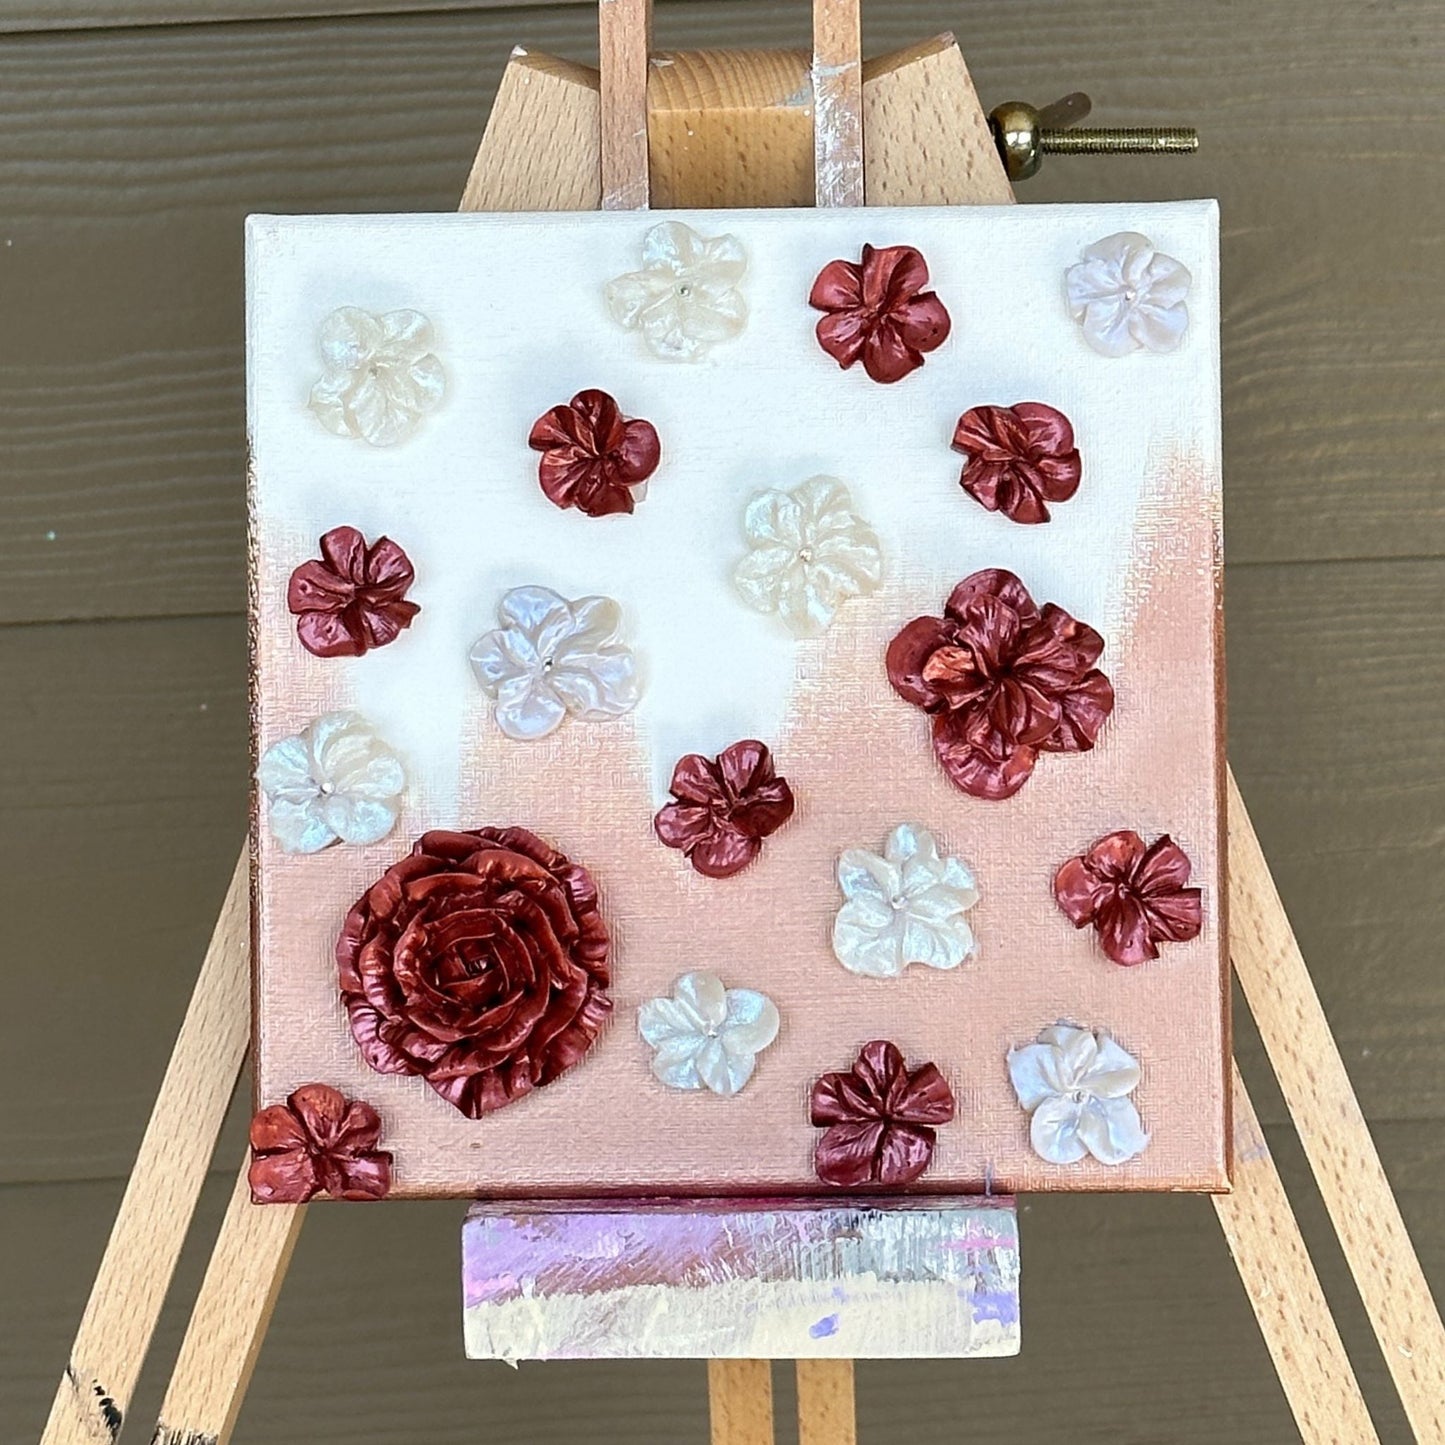 3D Rose Gold and White Flowers on Rose Gold and White background 8"x8"